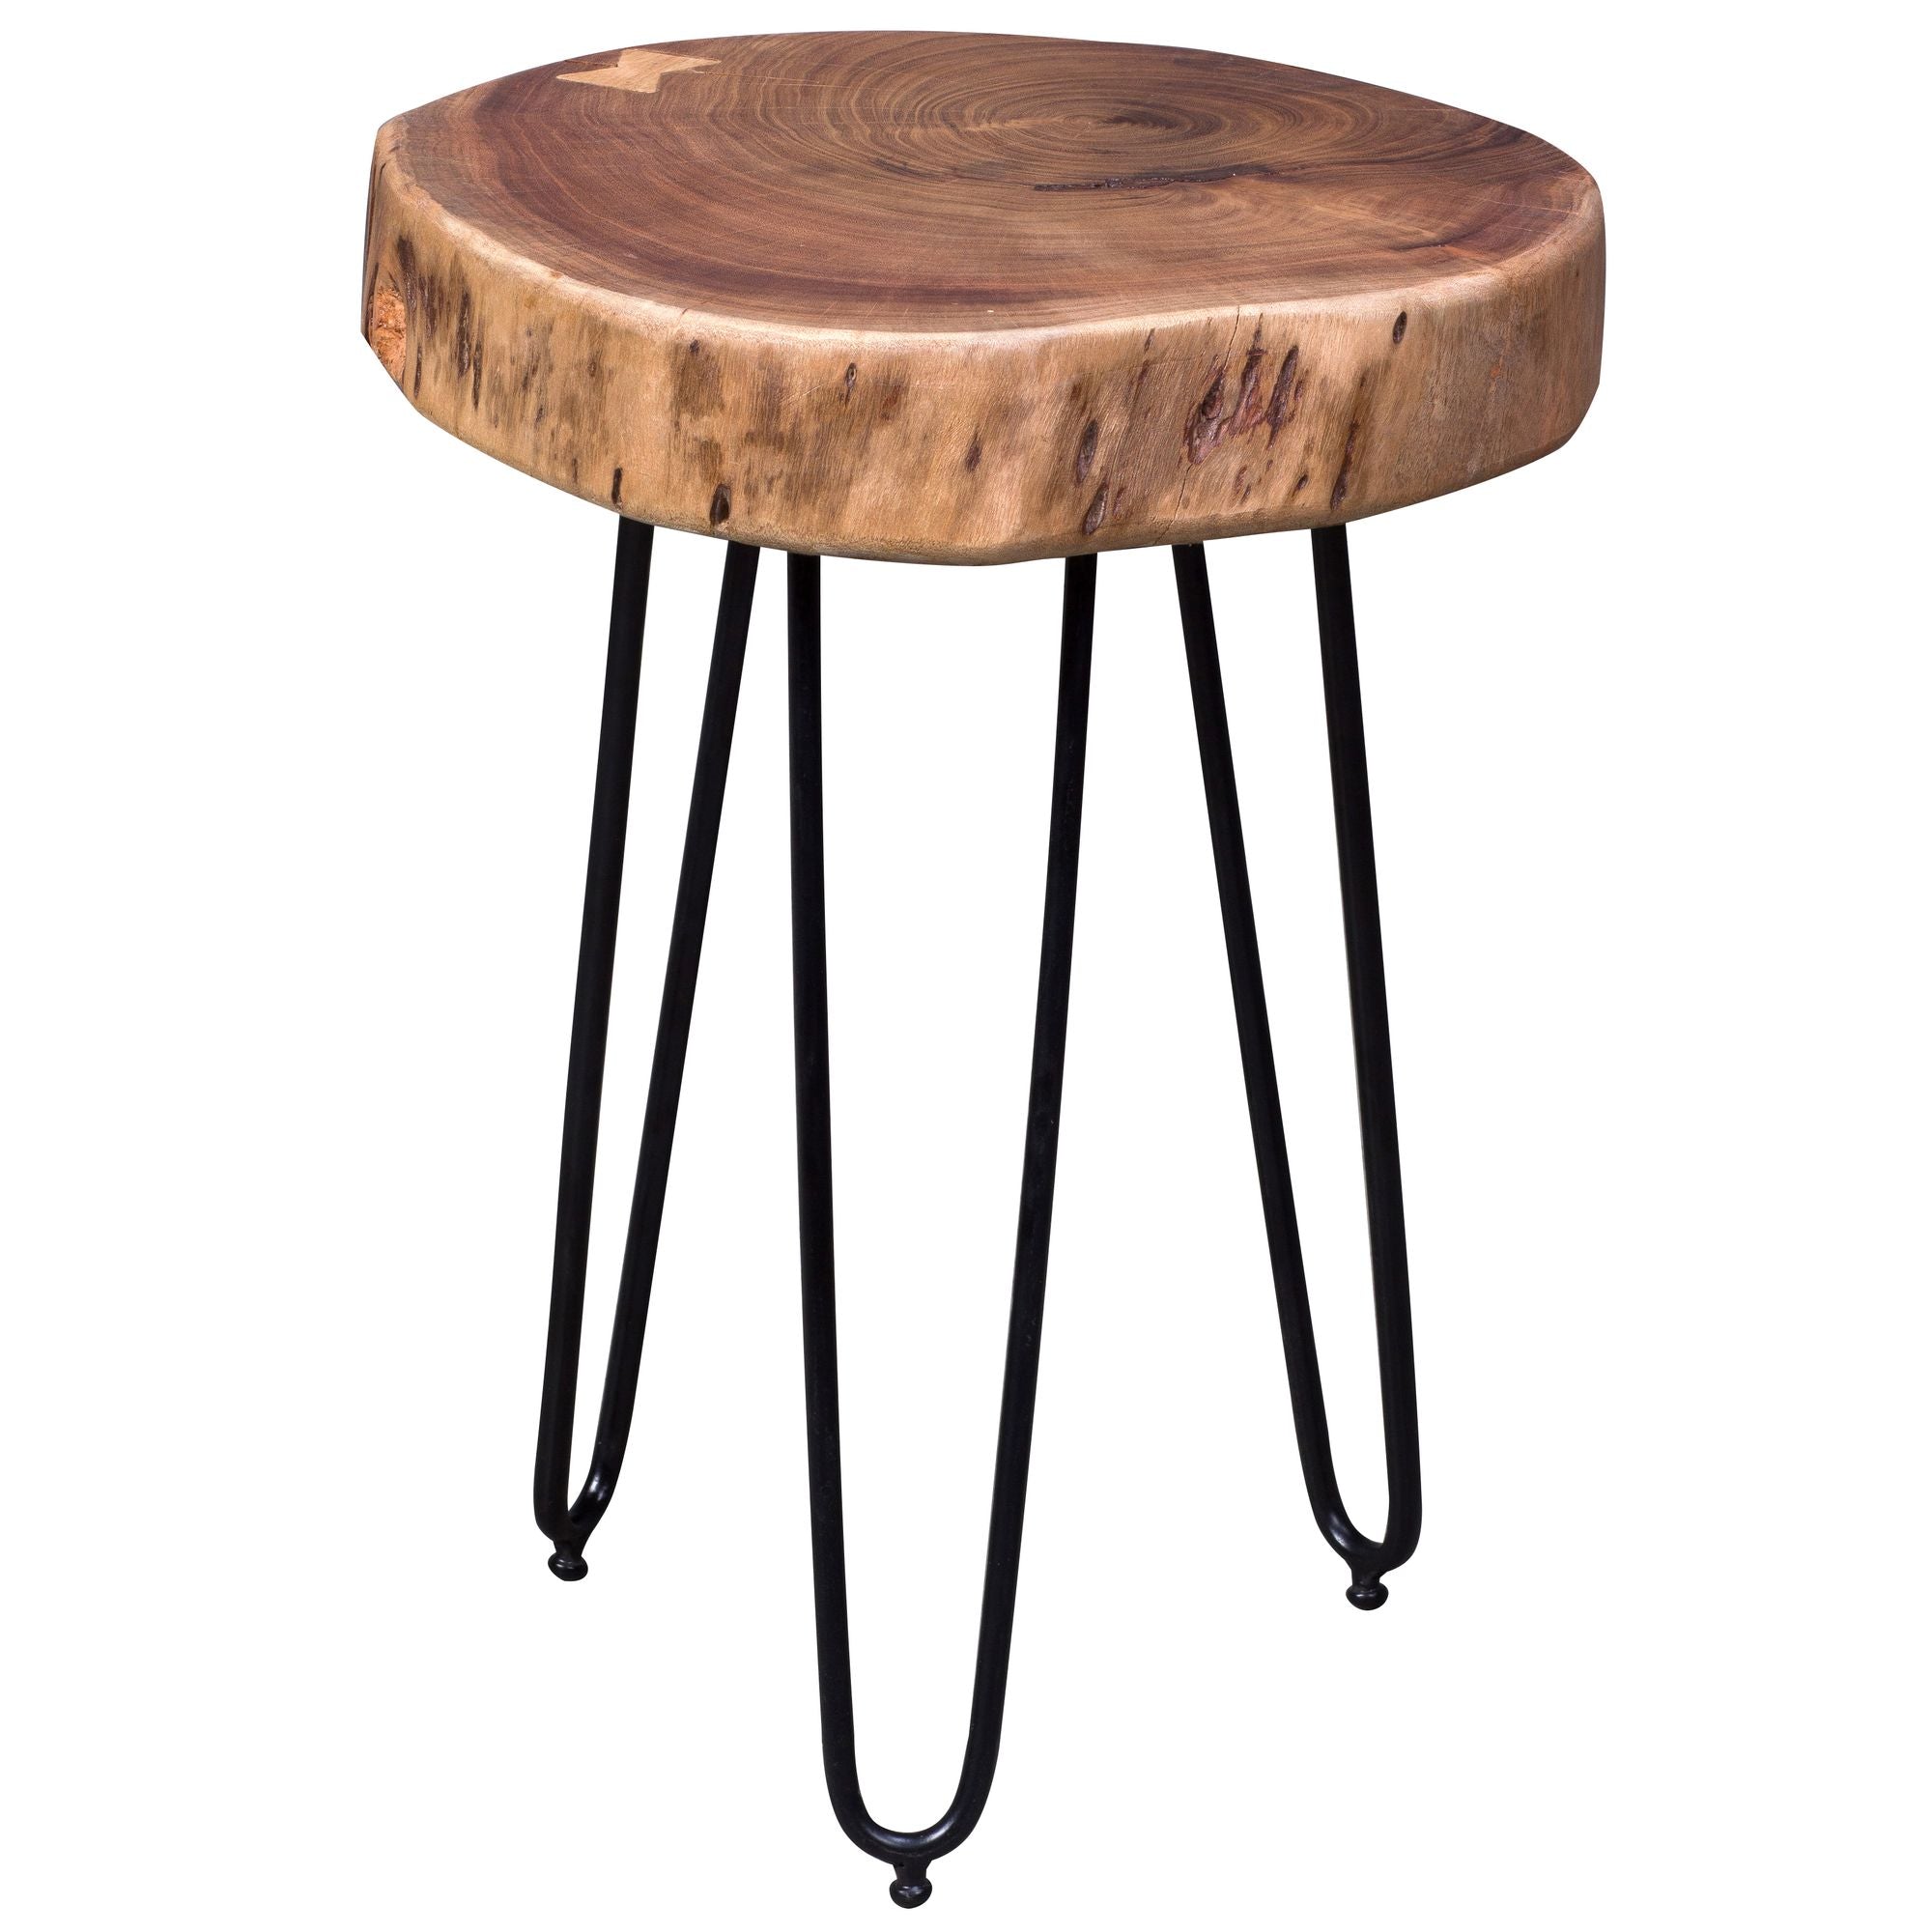 Nancy's Colesville Side Table - Coffee Table - Solid Wood - Acacia Wood - 35 x 35 cm - Brown - Black 